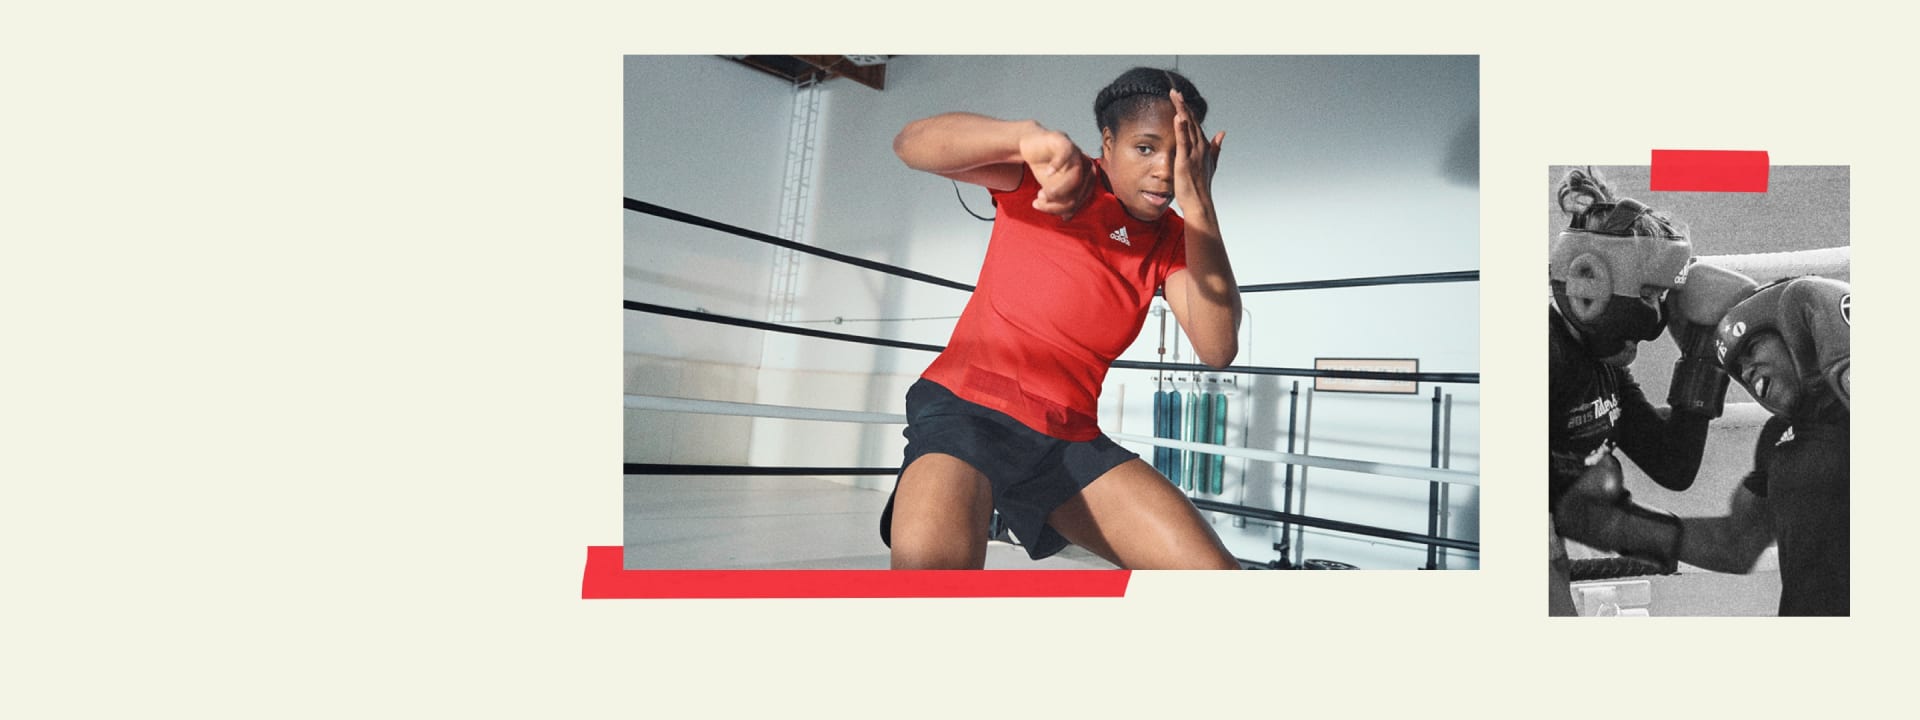 An image showing Caroline Dubois shadow boxing and boxing an opponent